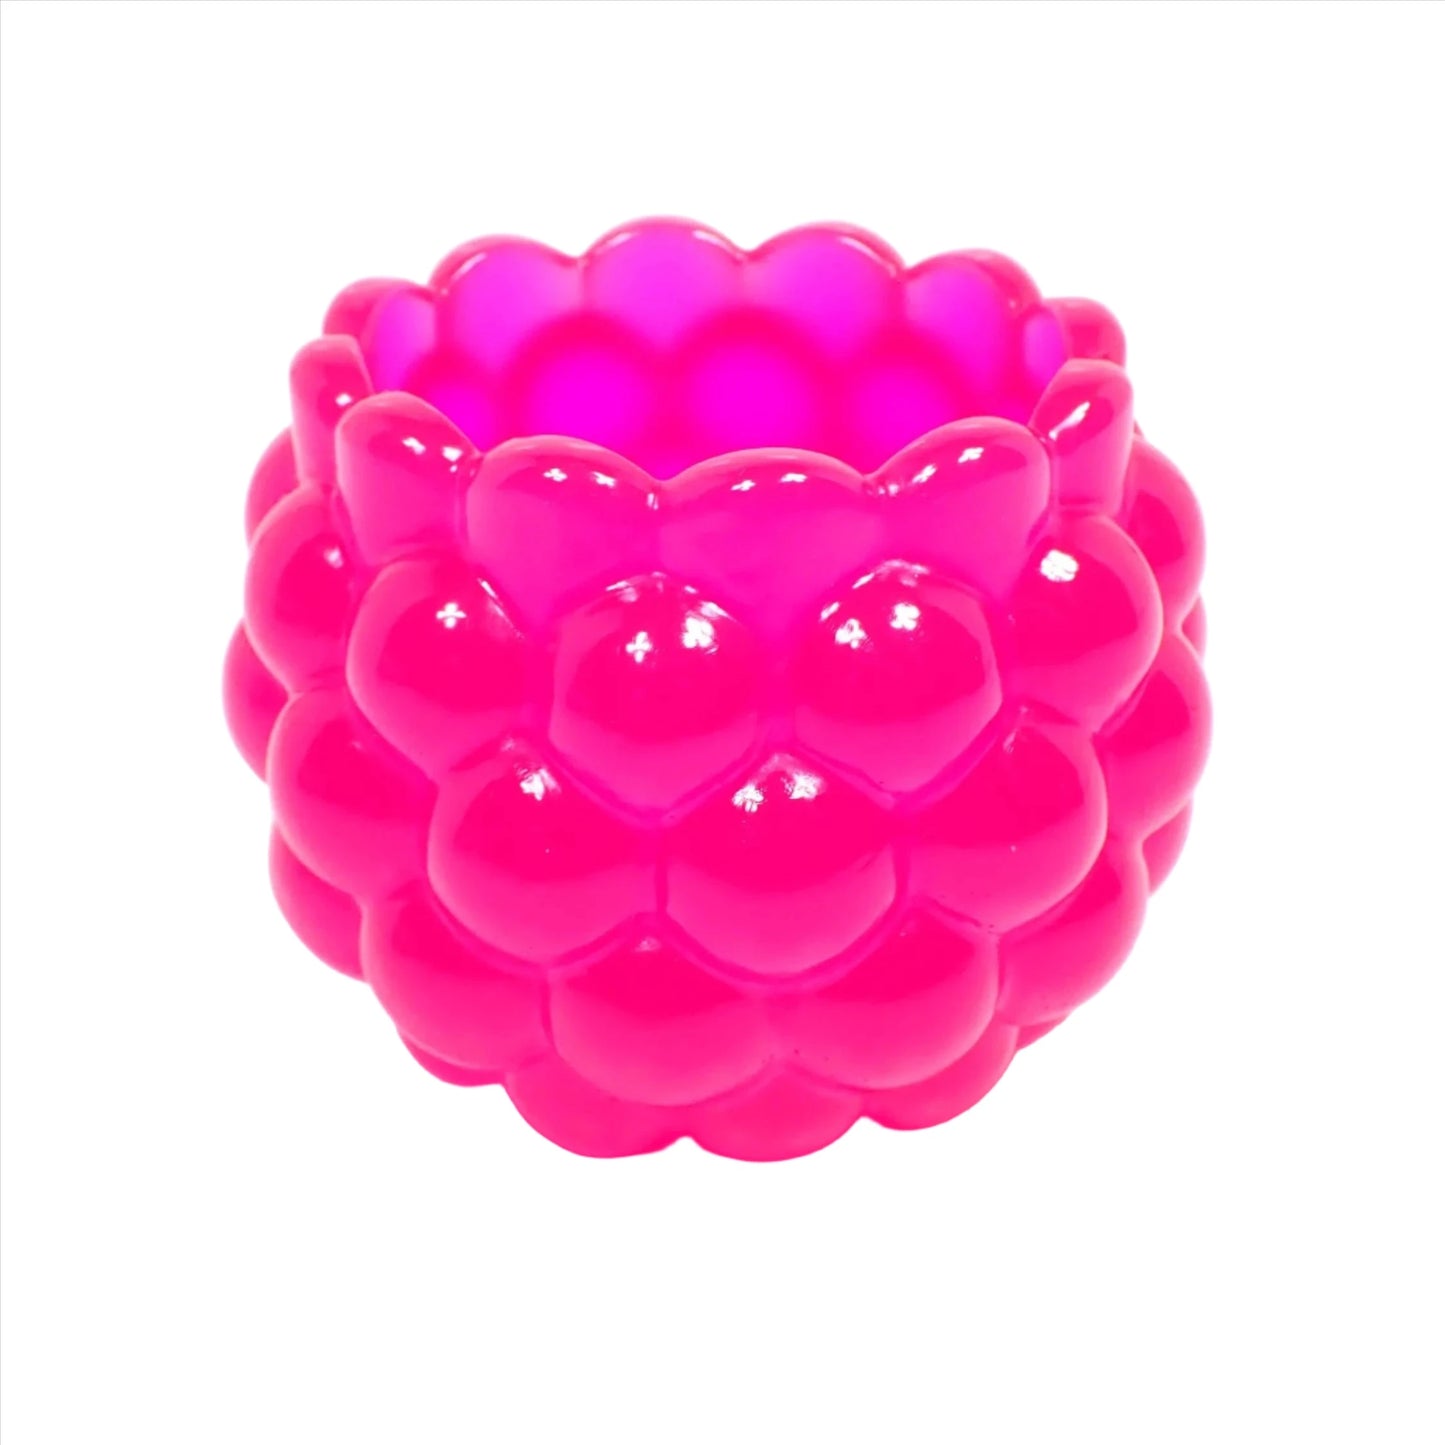 Side view of the handmade resin decorative bowl. The resin is bright neon pink in color. It has a rounded shape with a bumpy round ball textured on the outside. The top tapers slightly and has a scalloped edge.